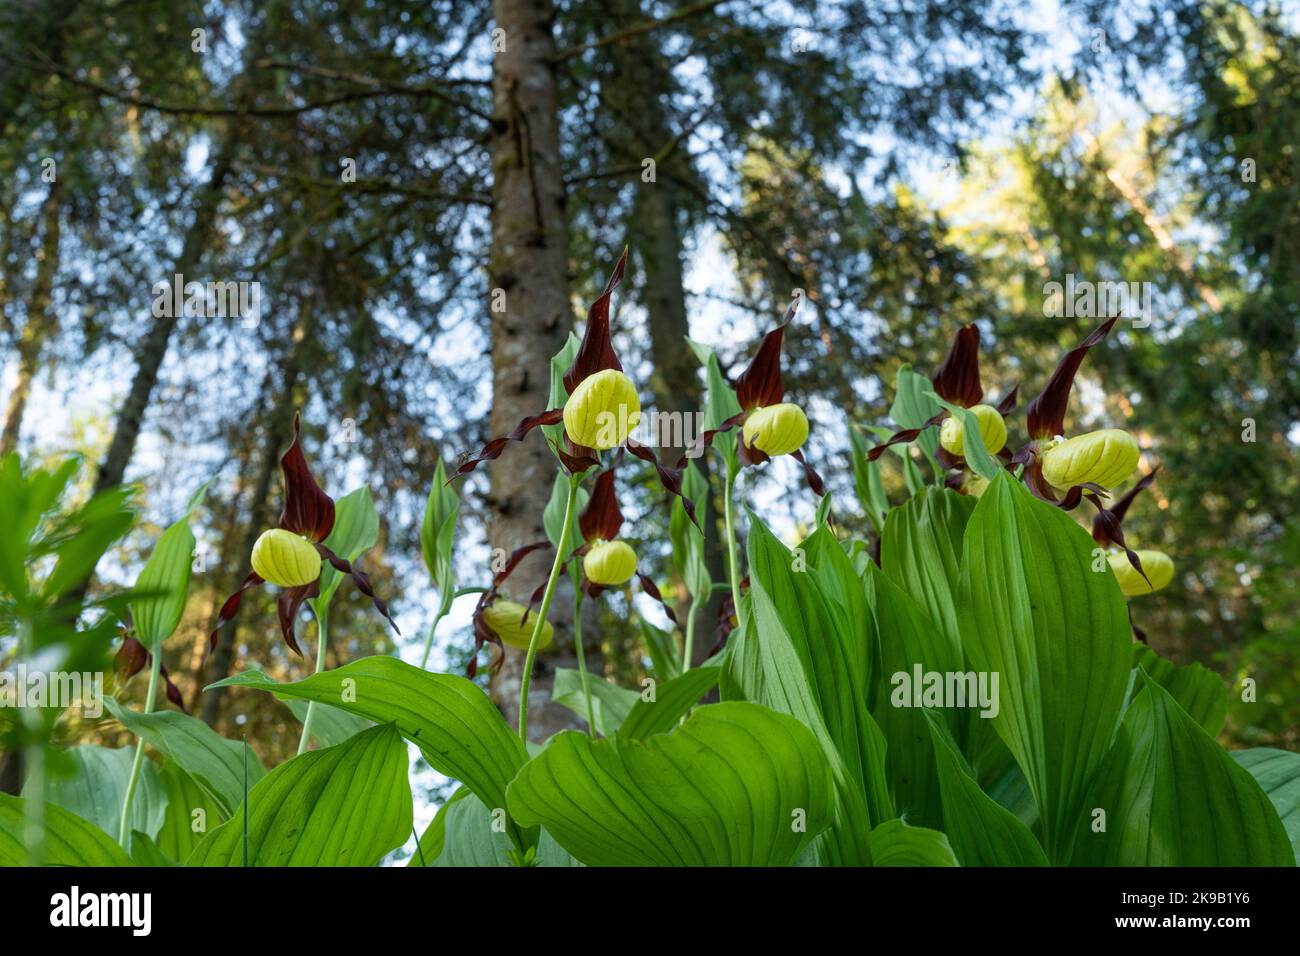 Blooming Lady's-slipper orchid in Estonian boreal forest during an early summer morning, shot from below Stock Photo